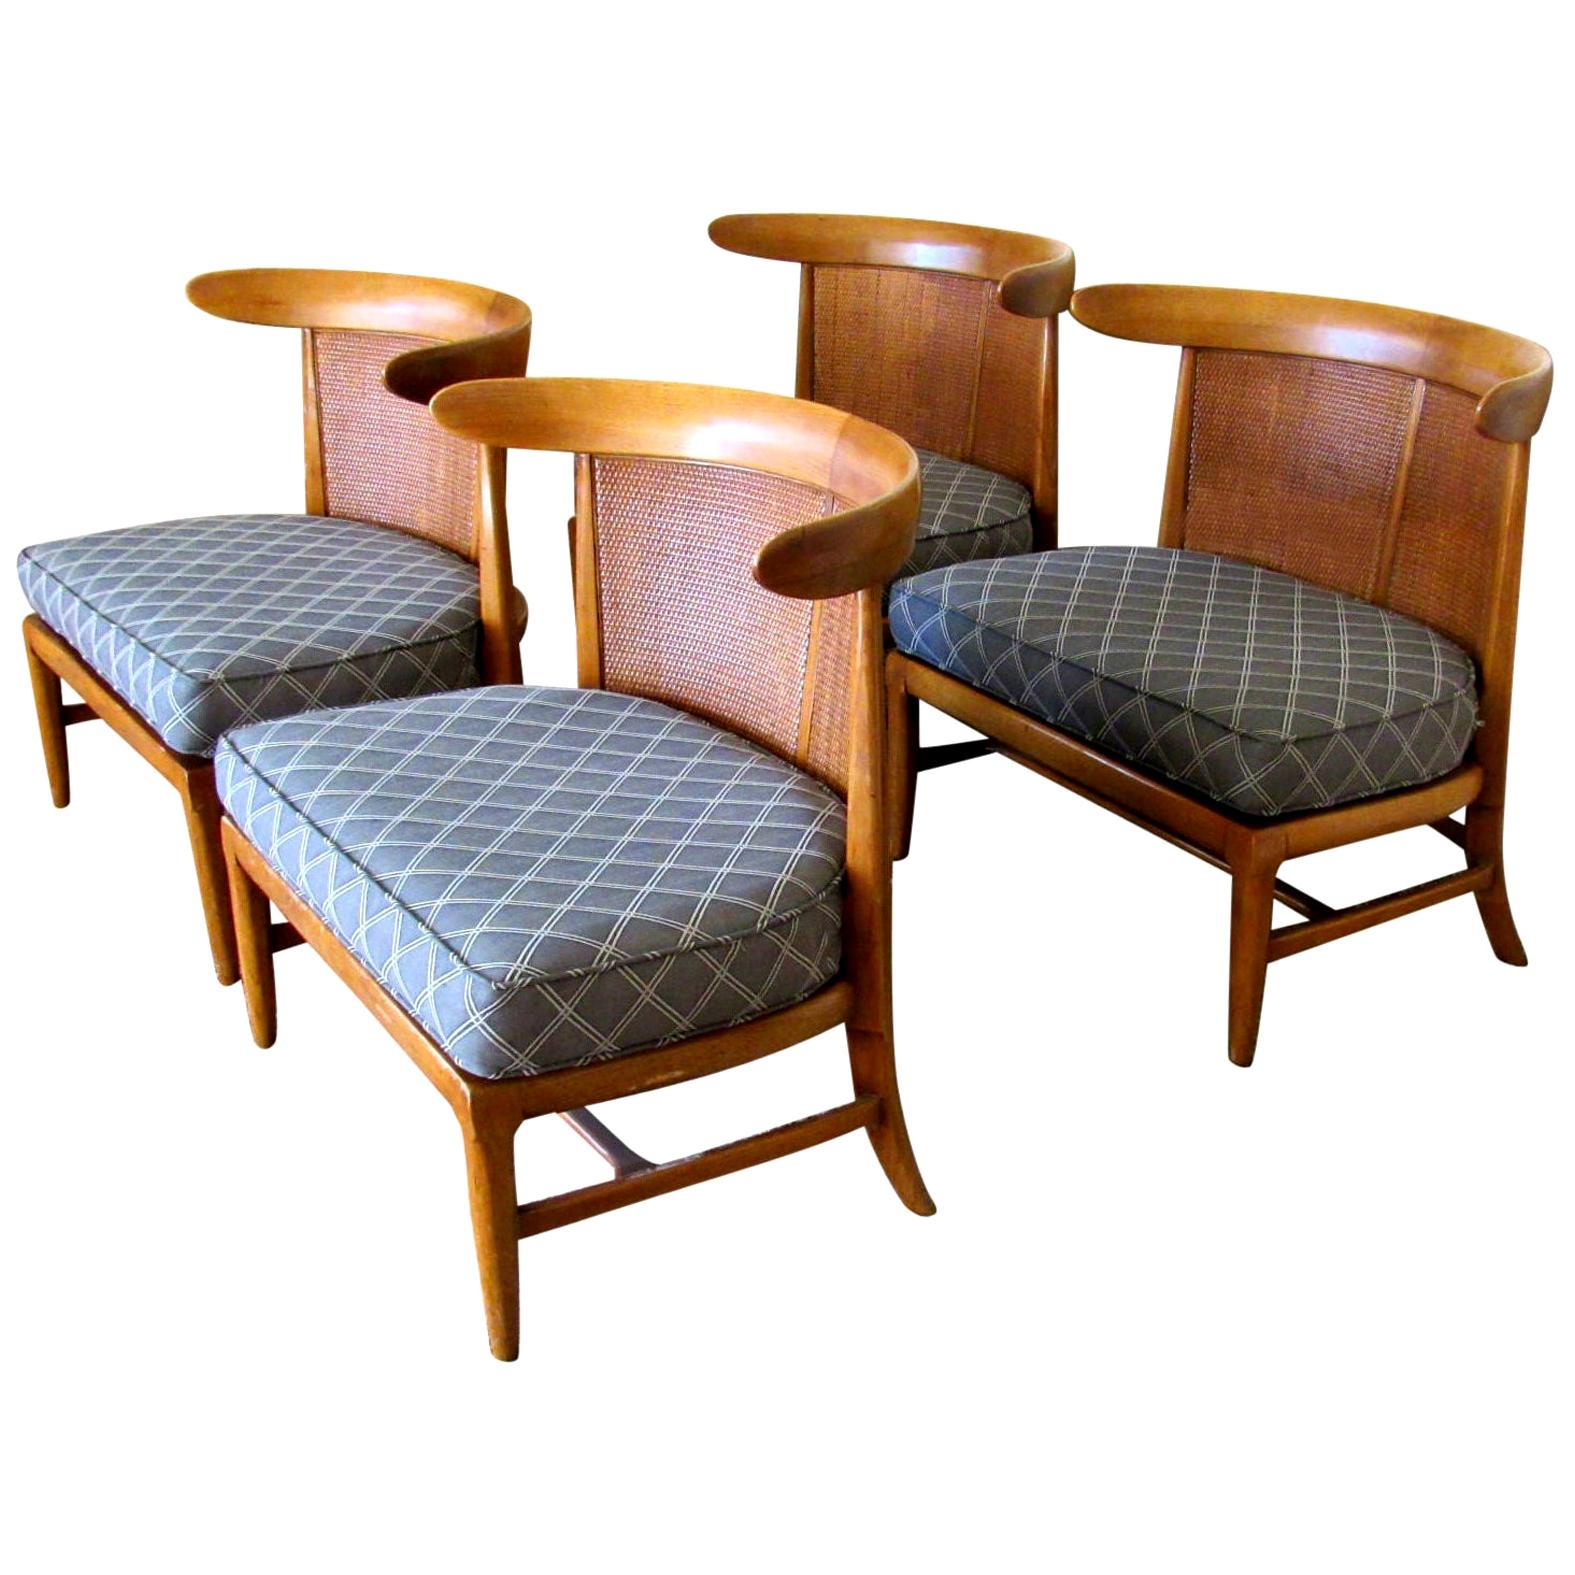 Four Midcentury Tomlinson Sophisticate Slipper Chairs, circa 1956 For Sale